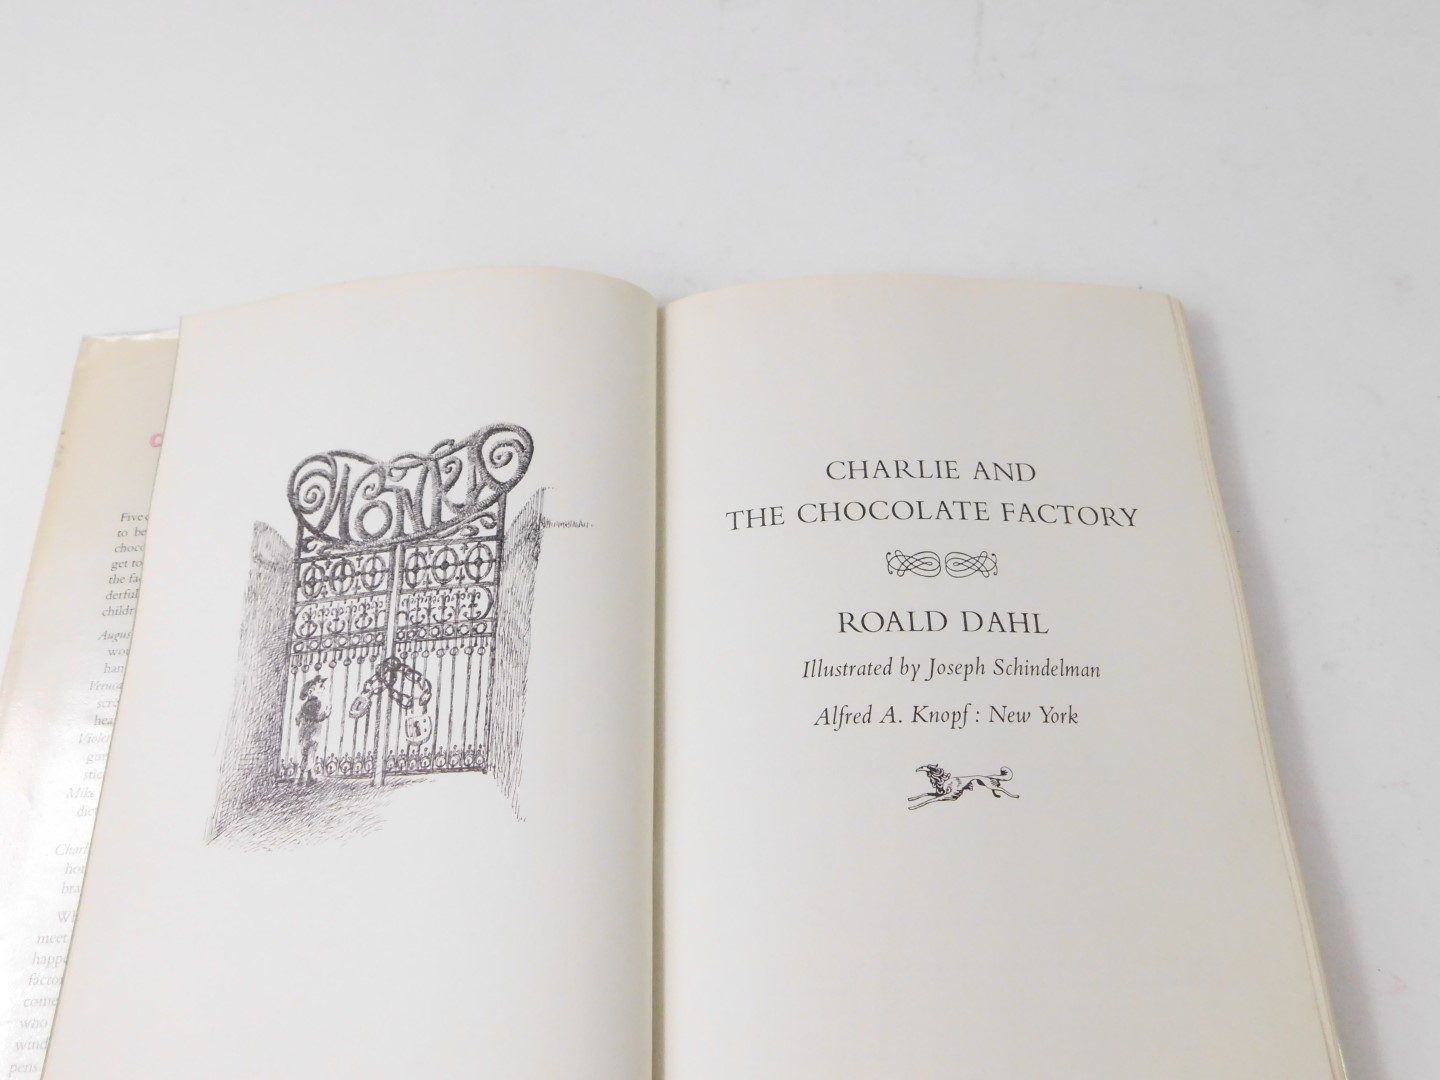 Roald Dahl. Charlie and The Chocolate Factory, first edition with dust wrapper, illustrated by - Image 3 of 6